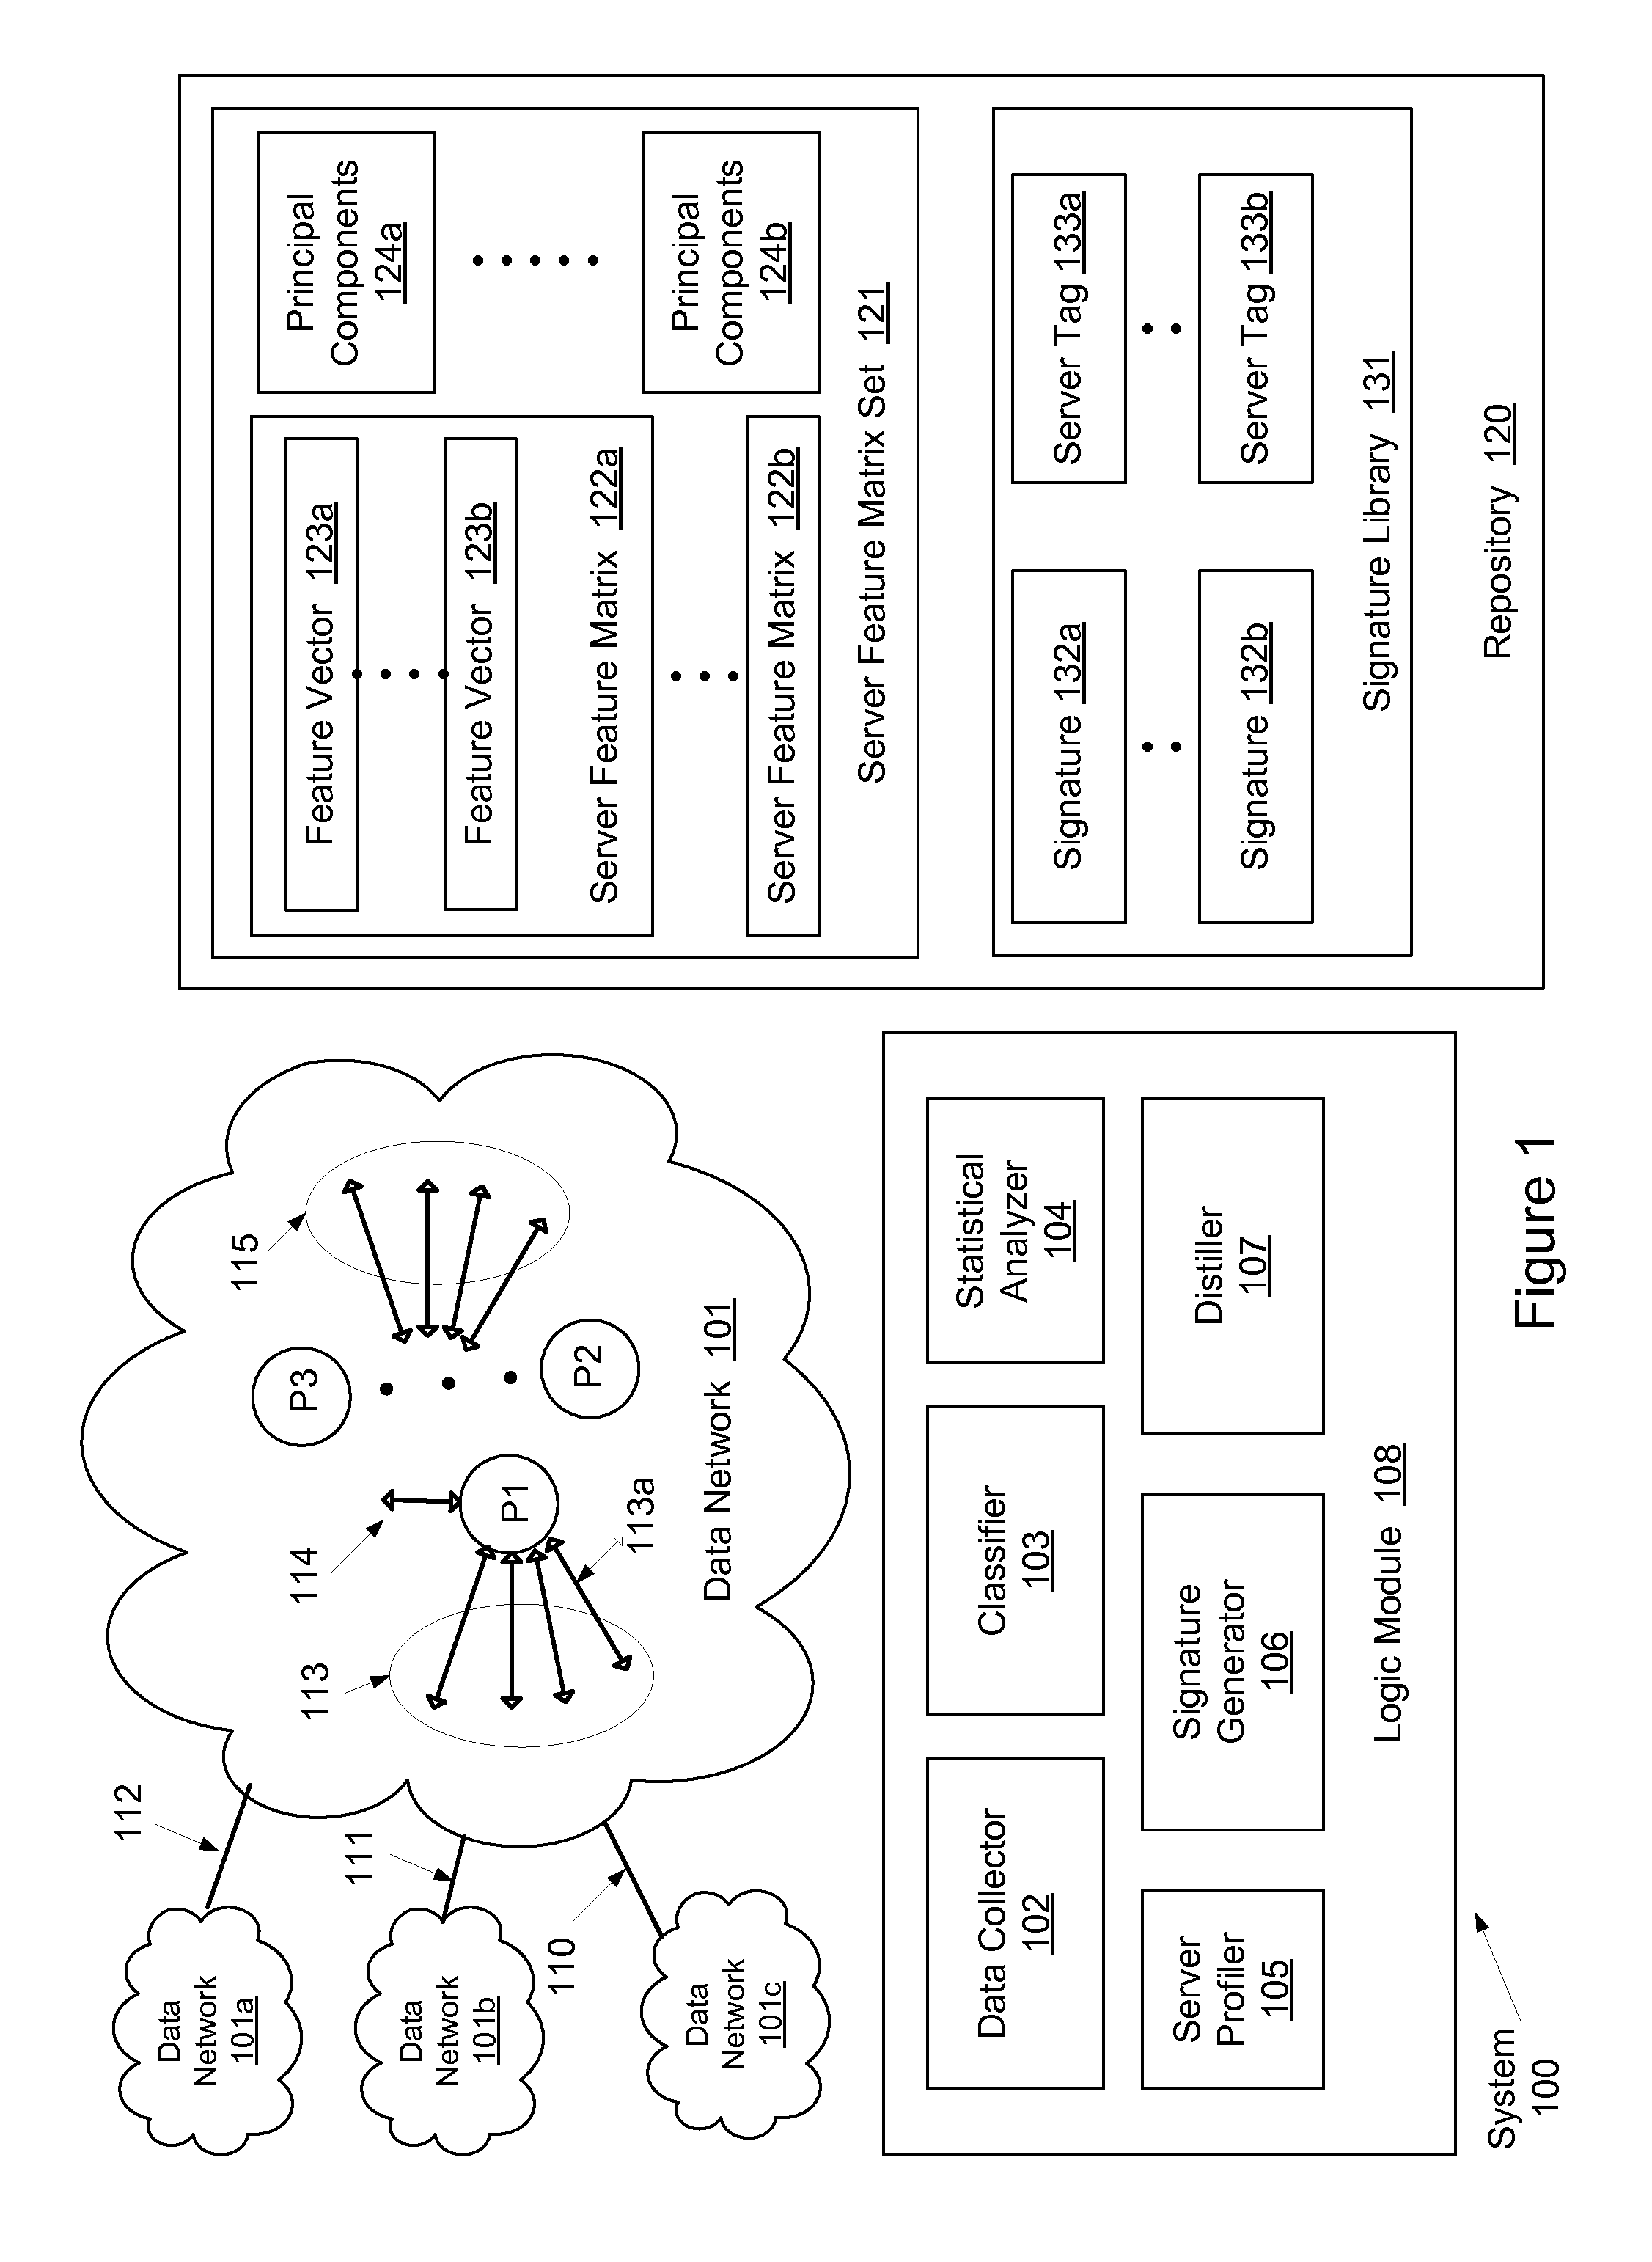 System and method for identifying network applications